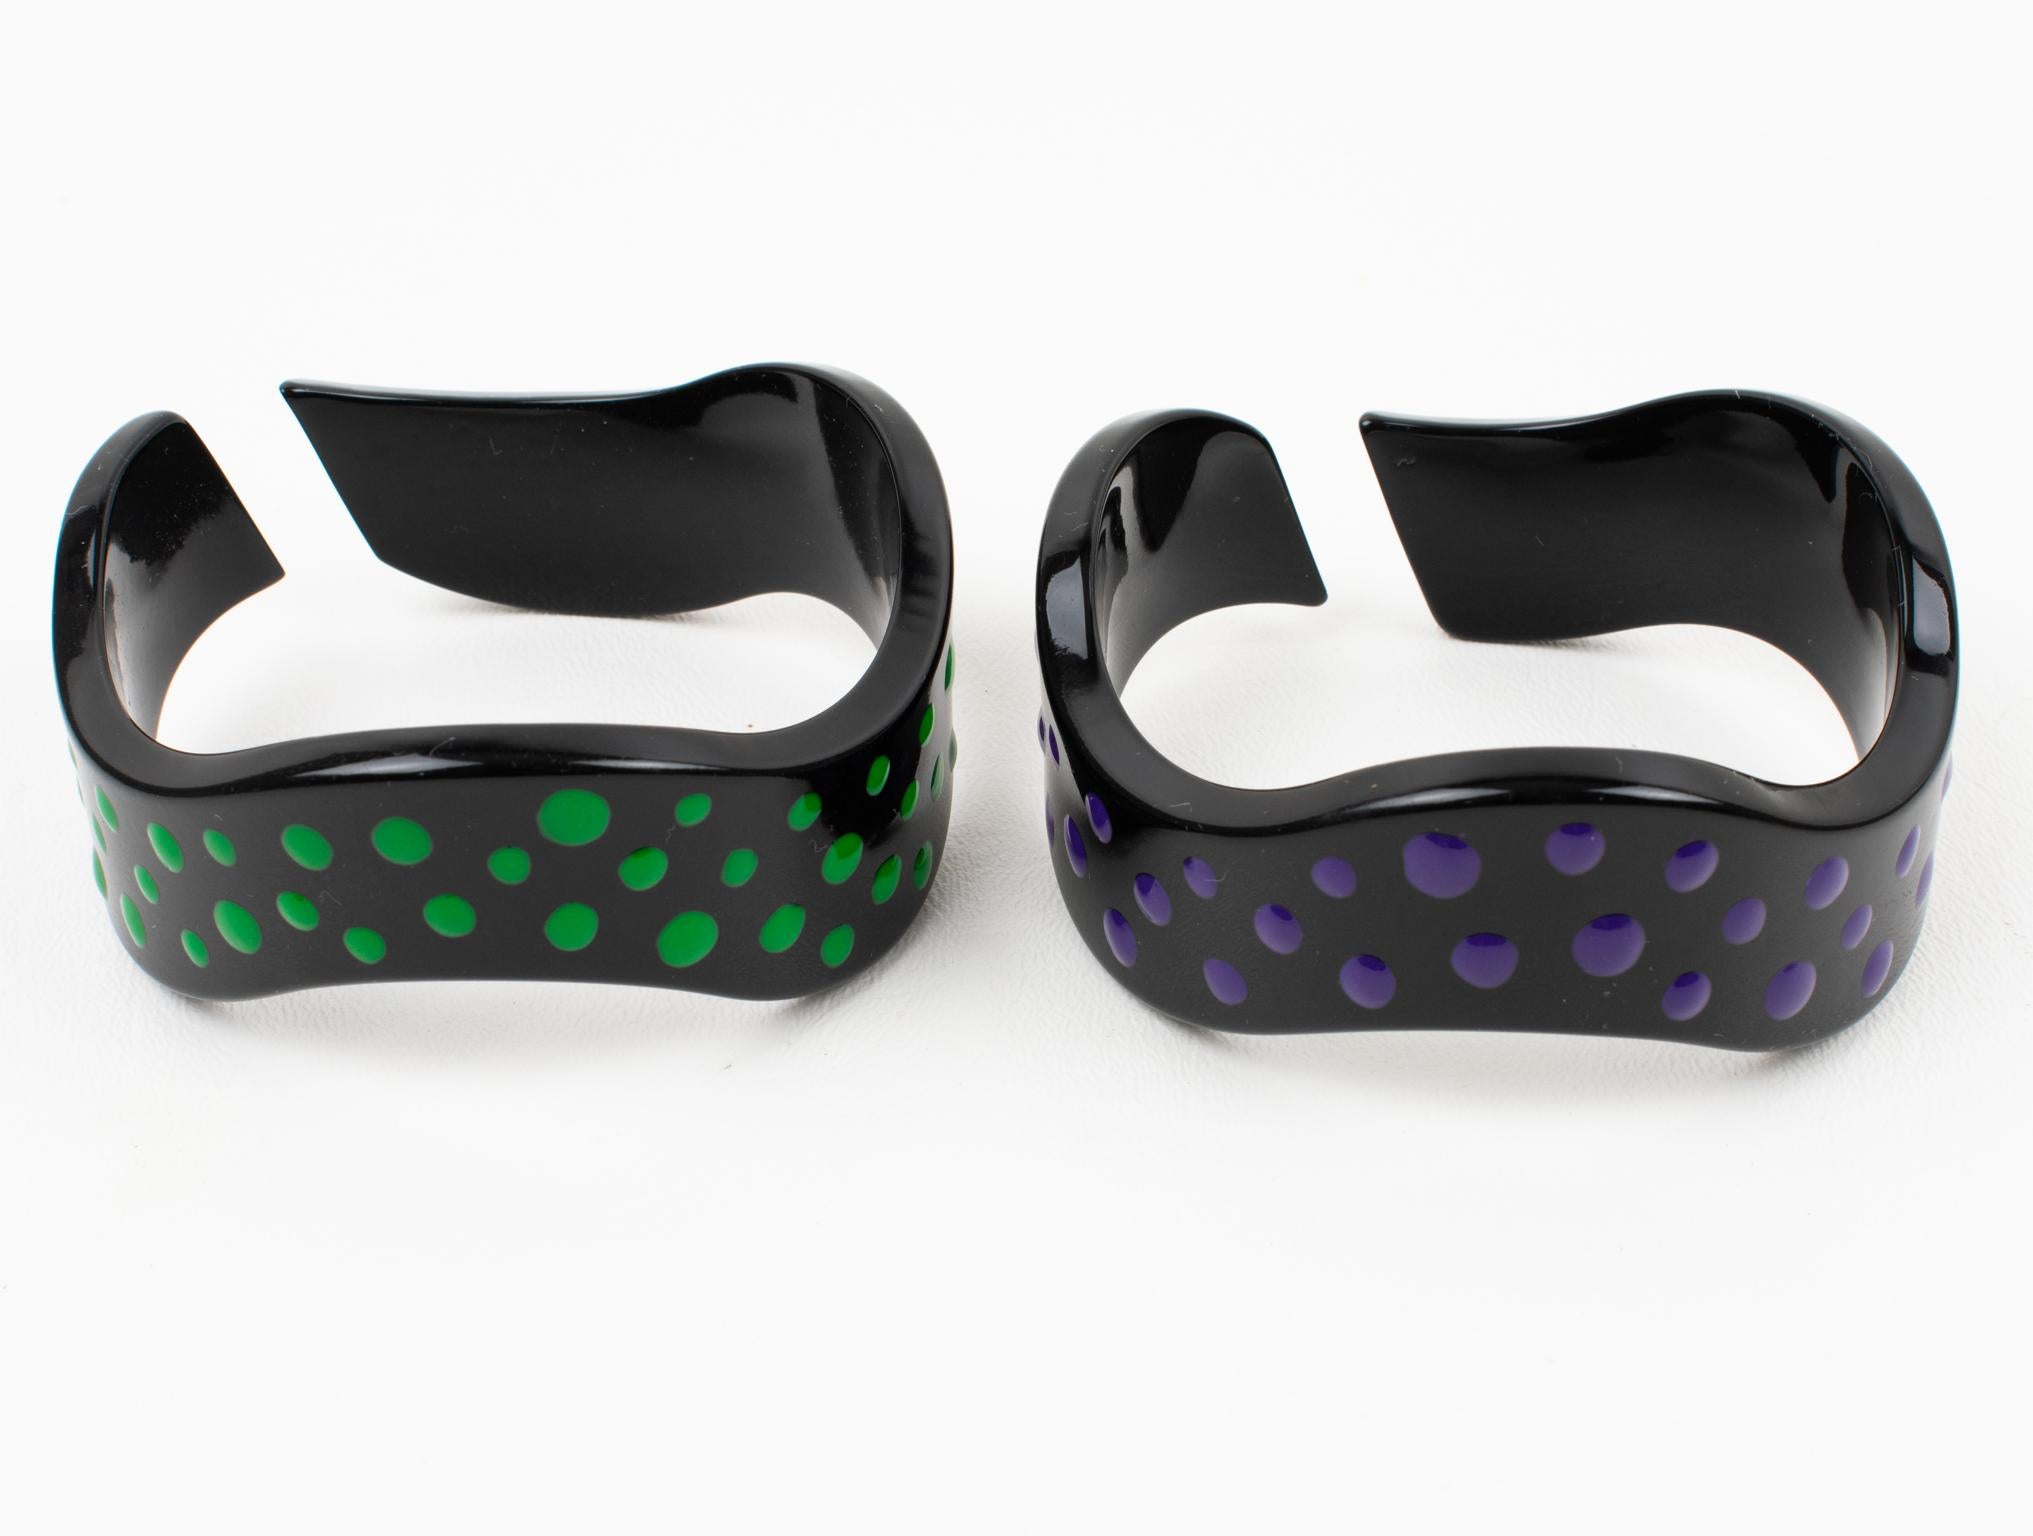 Missoni Black Lucite Resin Bracelet Bangle Purple and Green Dots, a pair For Sale 3